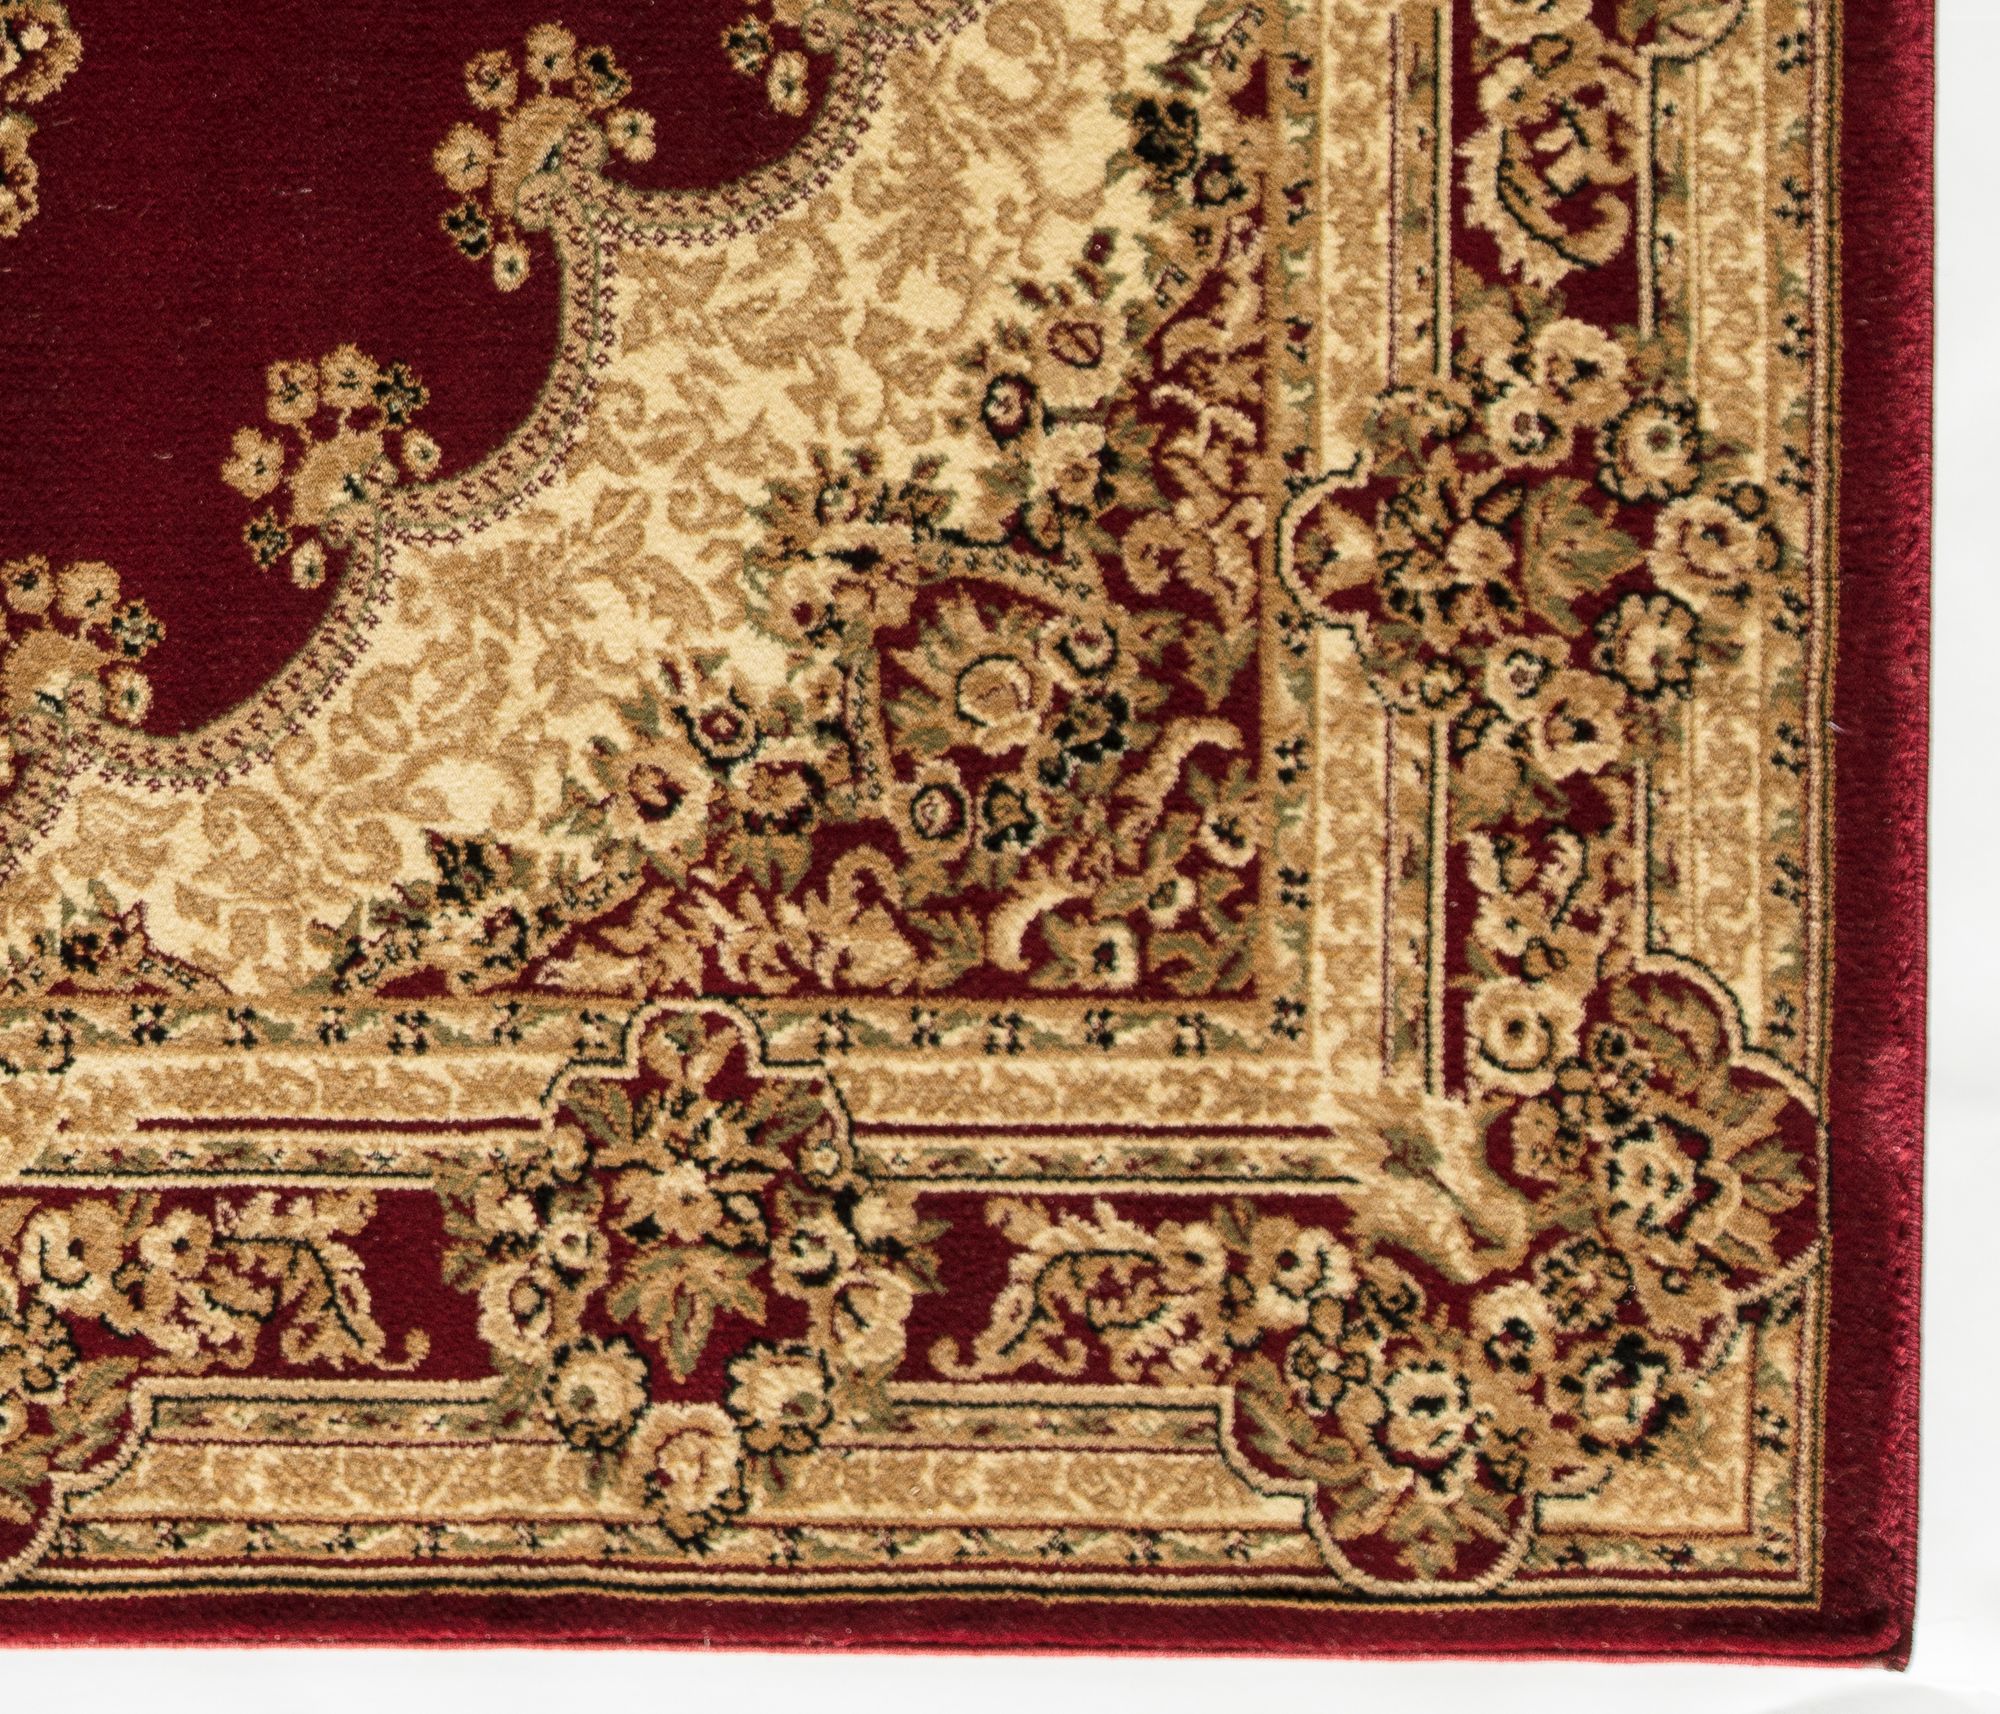 Rugs America Vista 807-RED Kerman Red Oriental Traditional Red Area Rug, 5'3"x7'10" - image 5 of 5